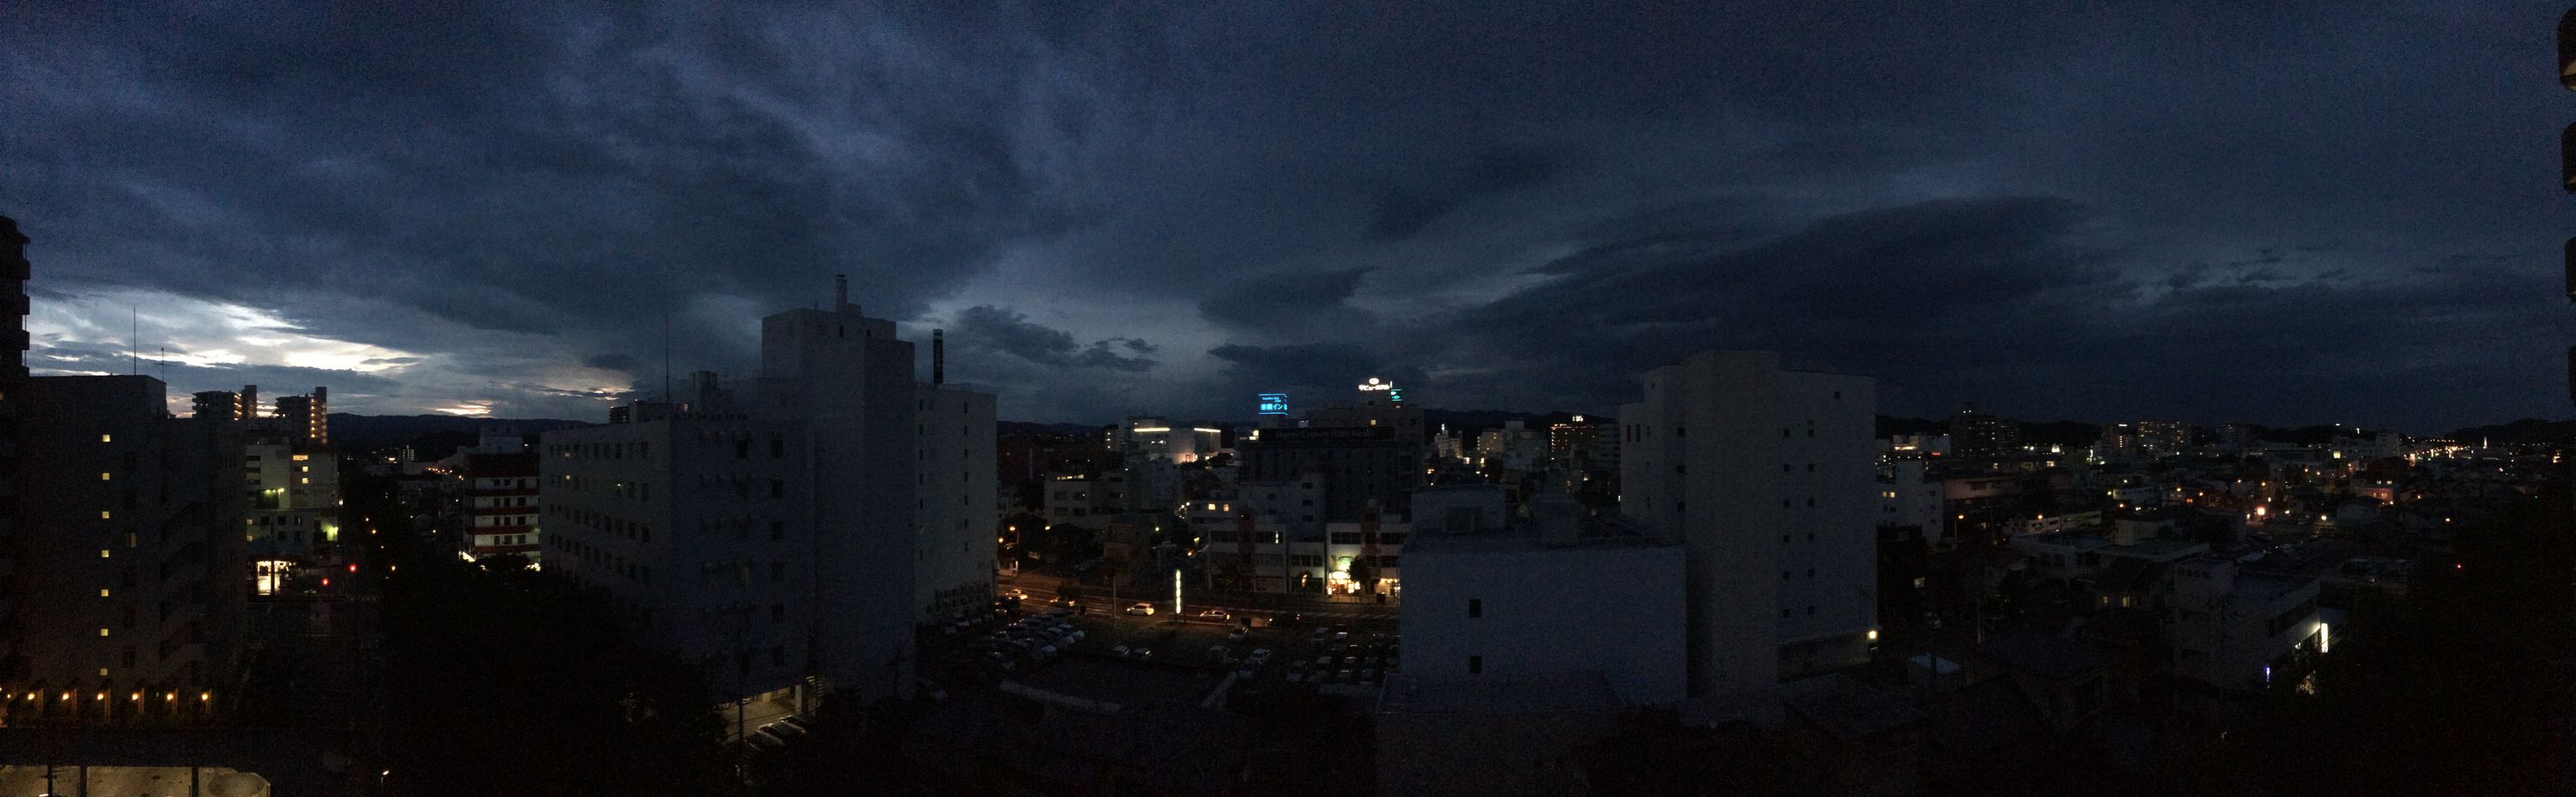 Dusk view over a Japanese cityscape.